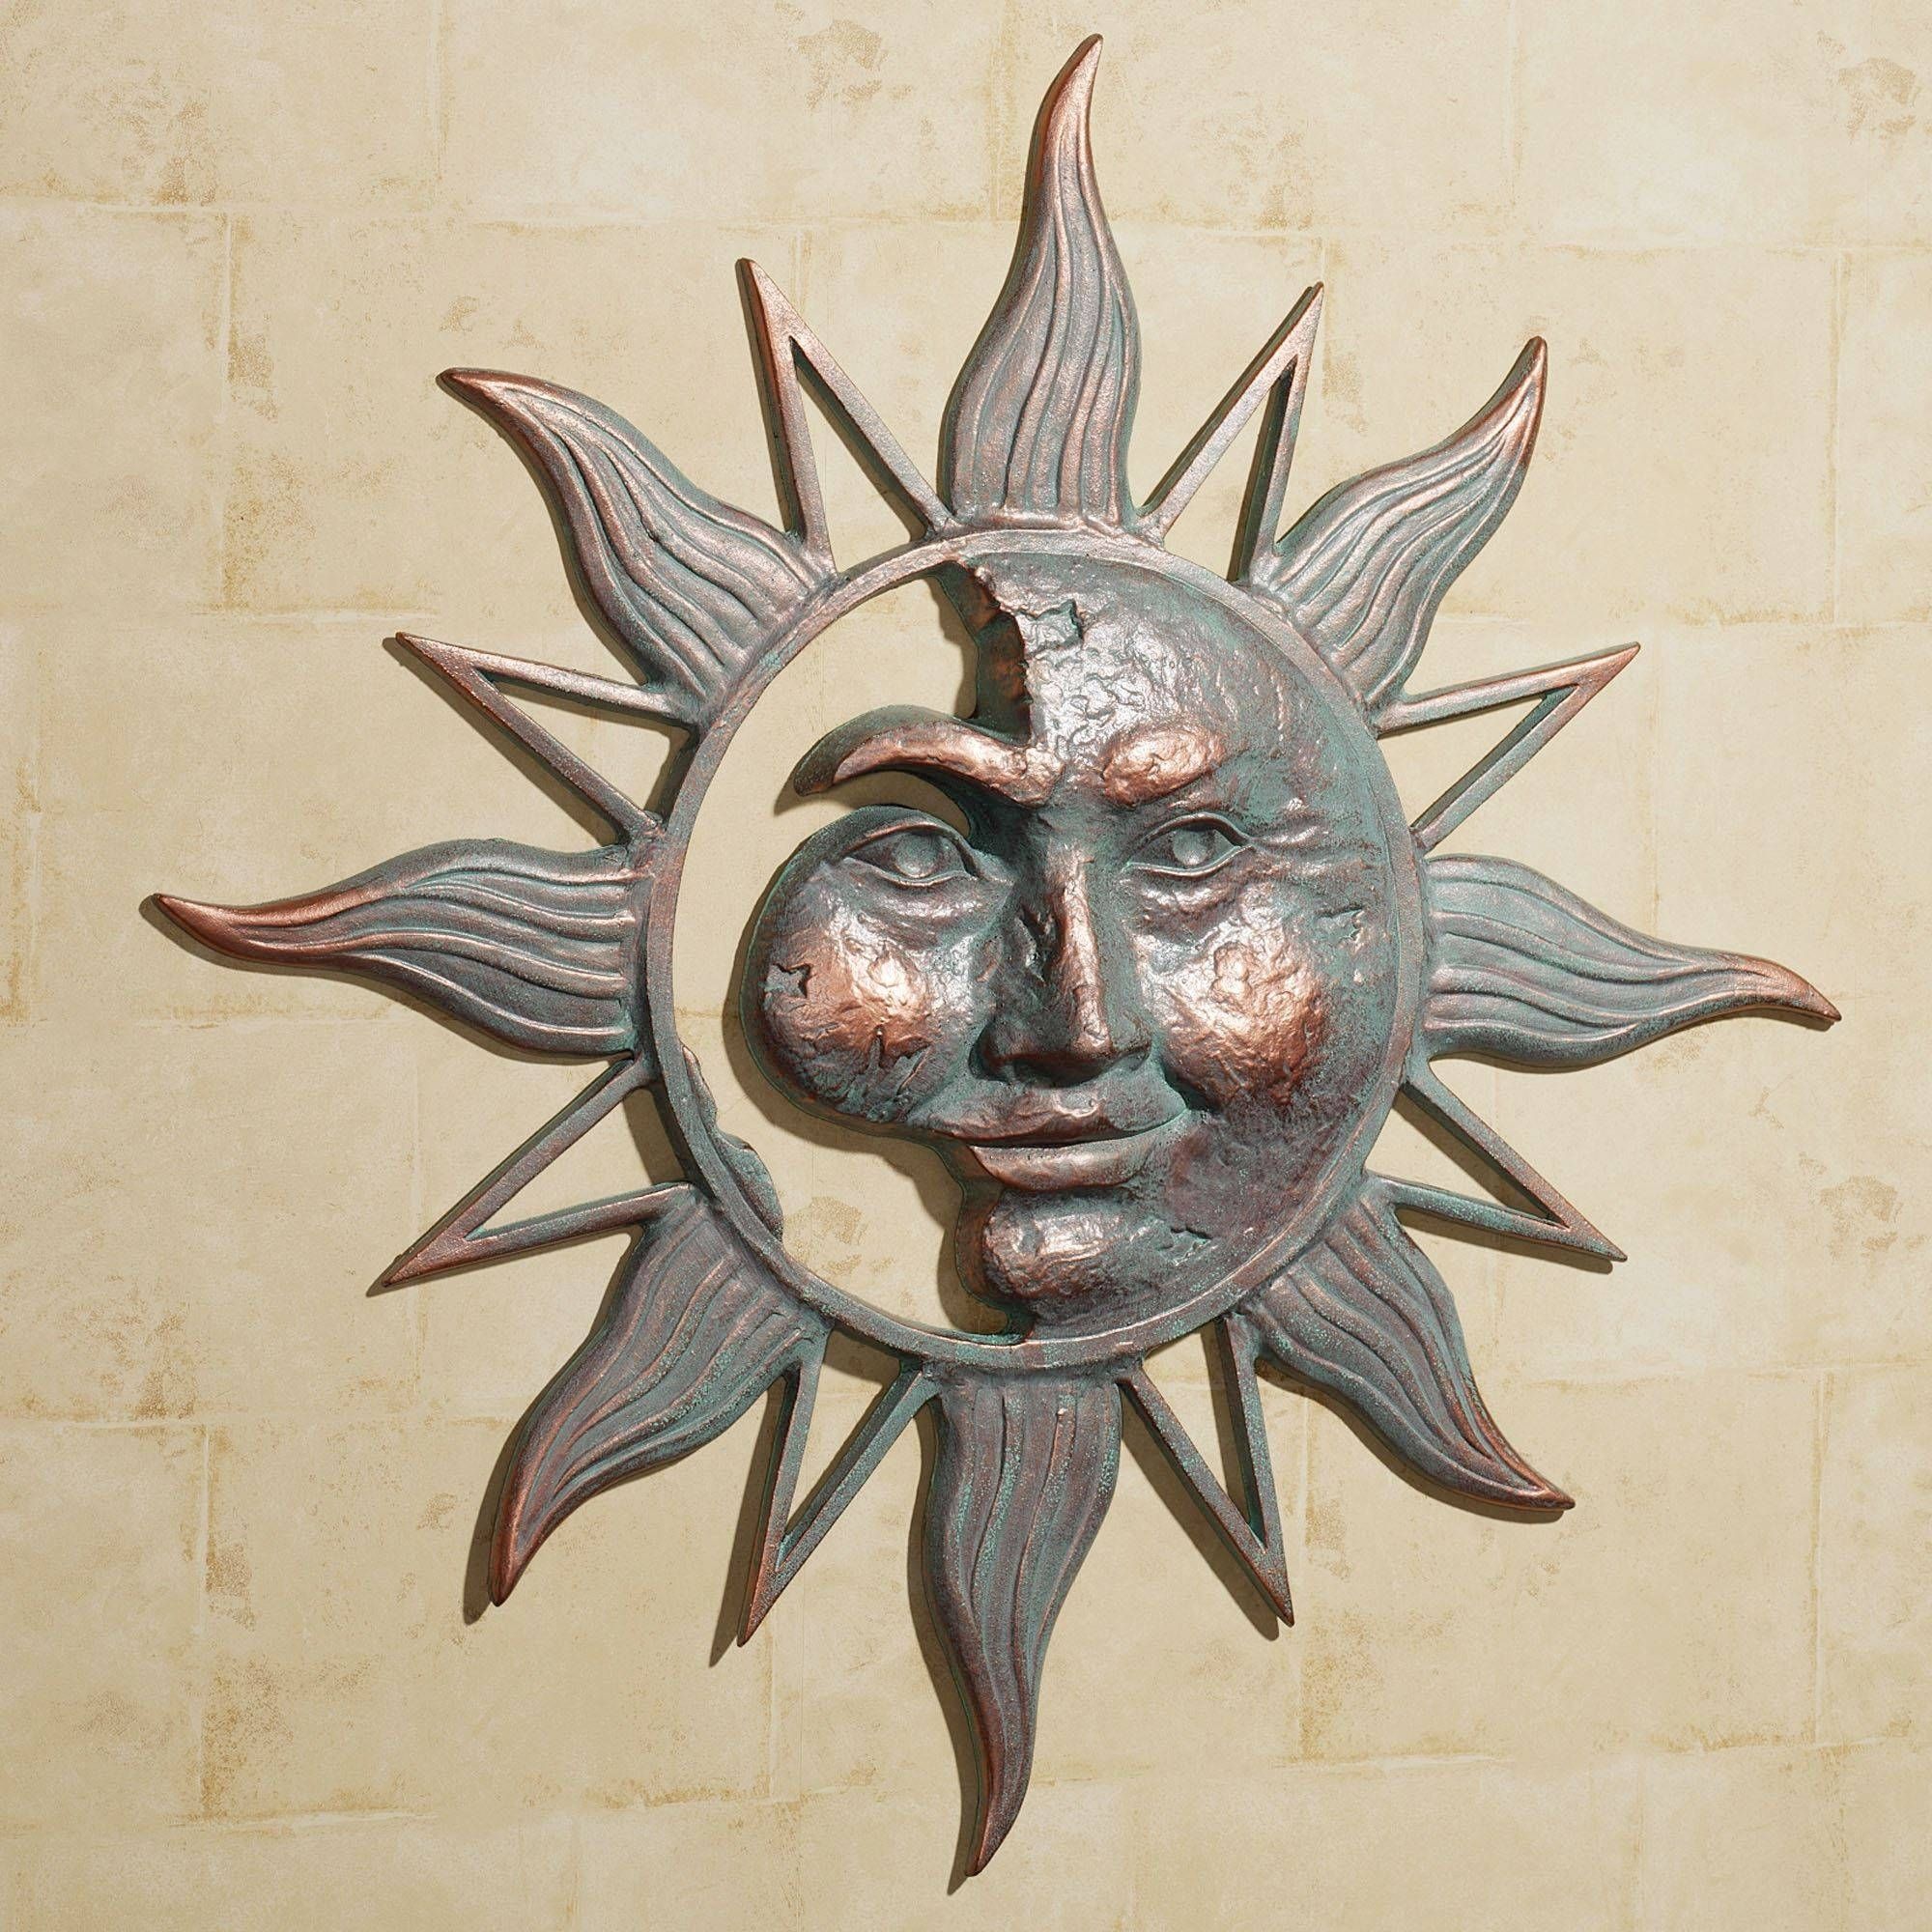 Outdoor Wall Murals For The Garden Metal Sun Wall Art Wrought Iron Pertaining To Best And Newest Wrought Iron Metal Wall Art (View 17 of 20)